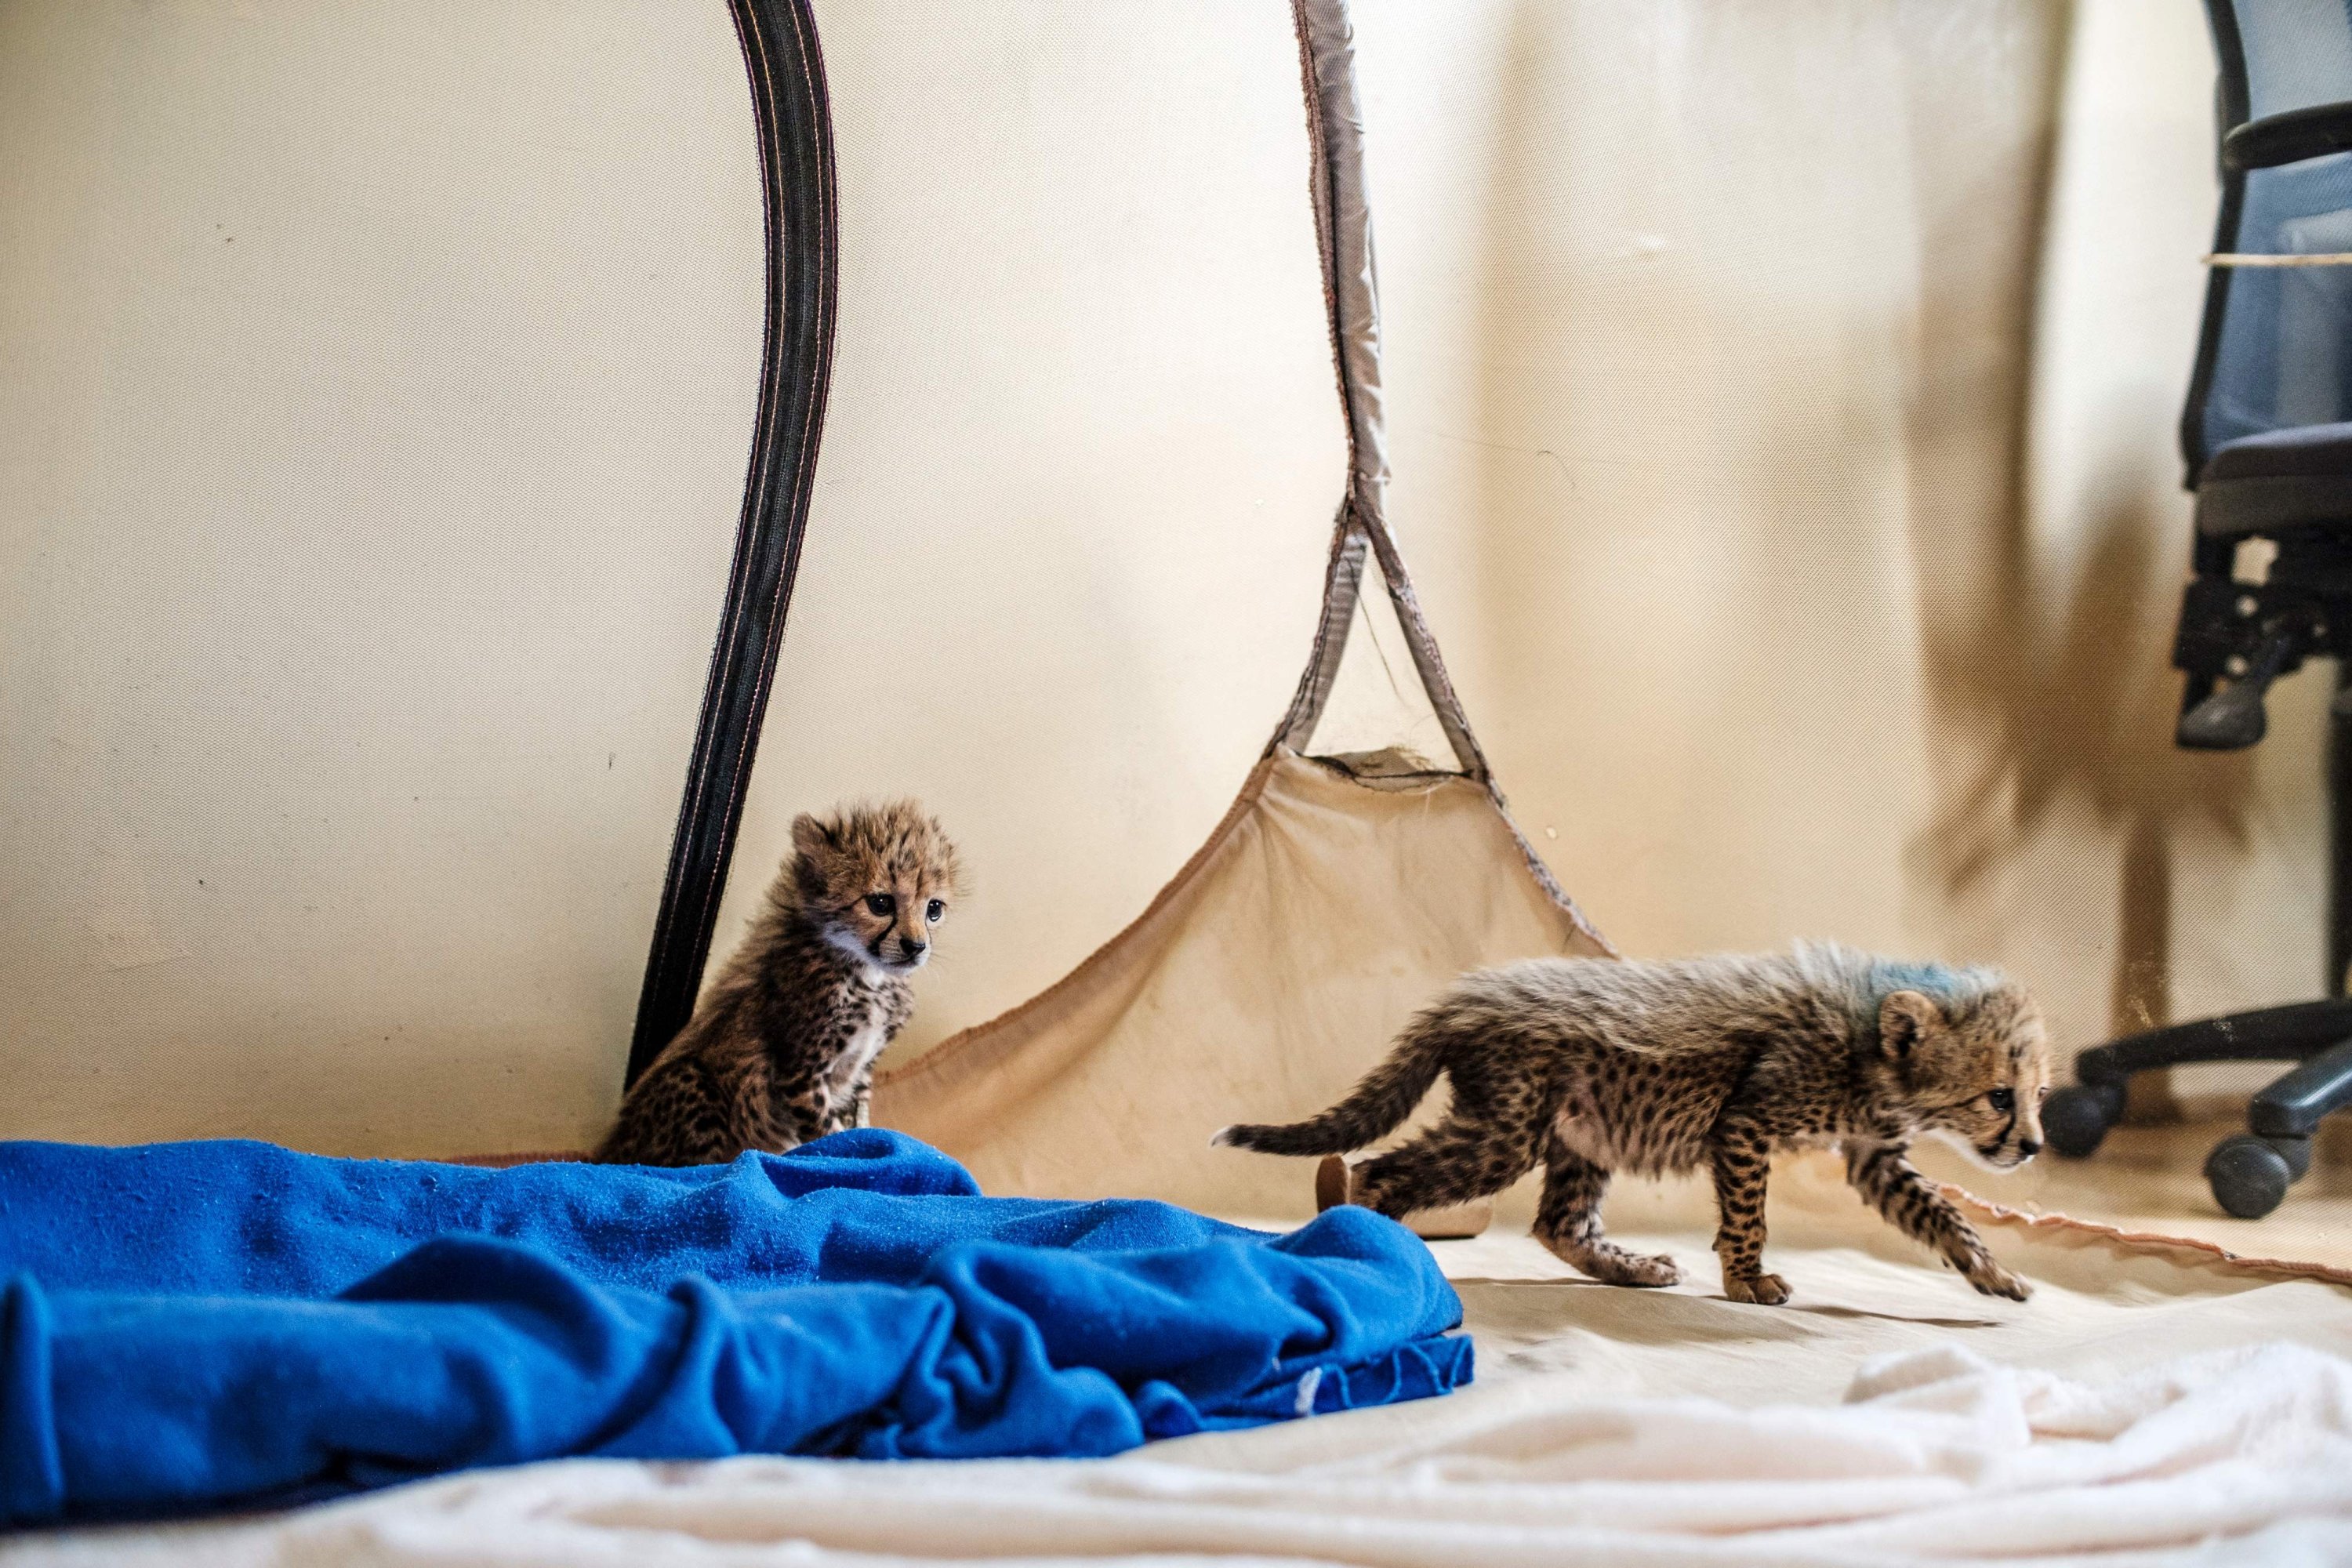 Baby cheetahs play at one of the facilities of the Cheetah Conservation Fund, in the city of Hargeisa, Somaliland, on Sep. 17, 2021. (AFP Photo)